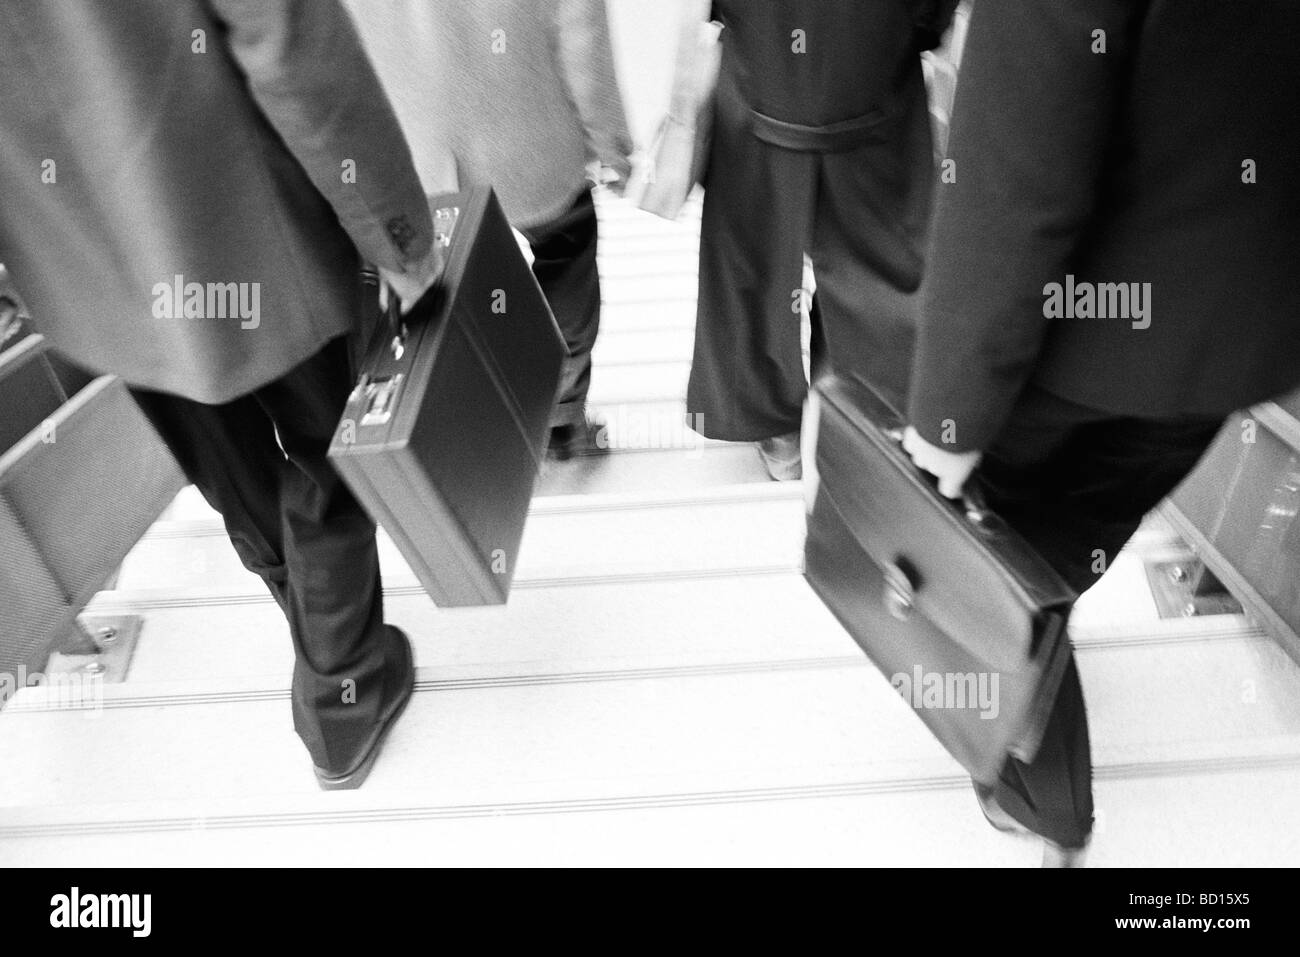 Business professionals with briefcases descending stairs Stock Photo